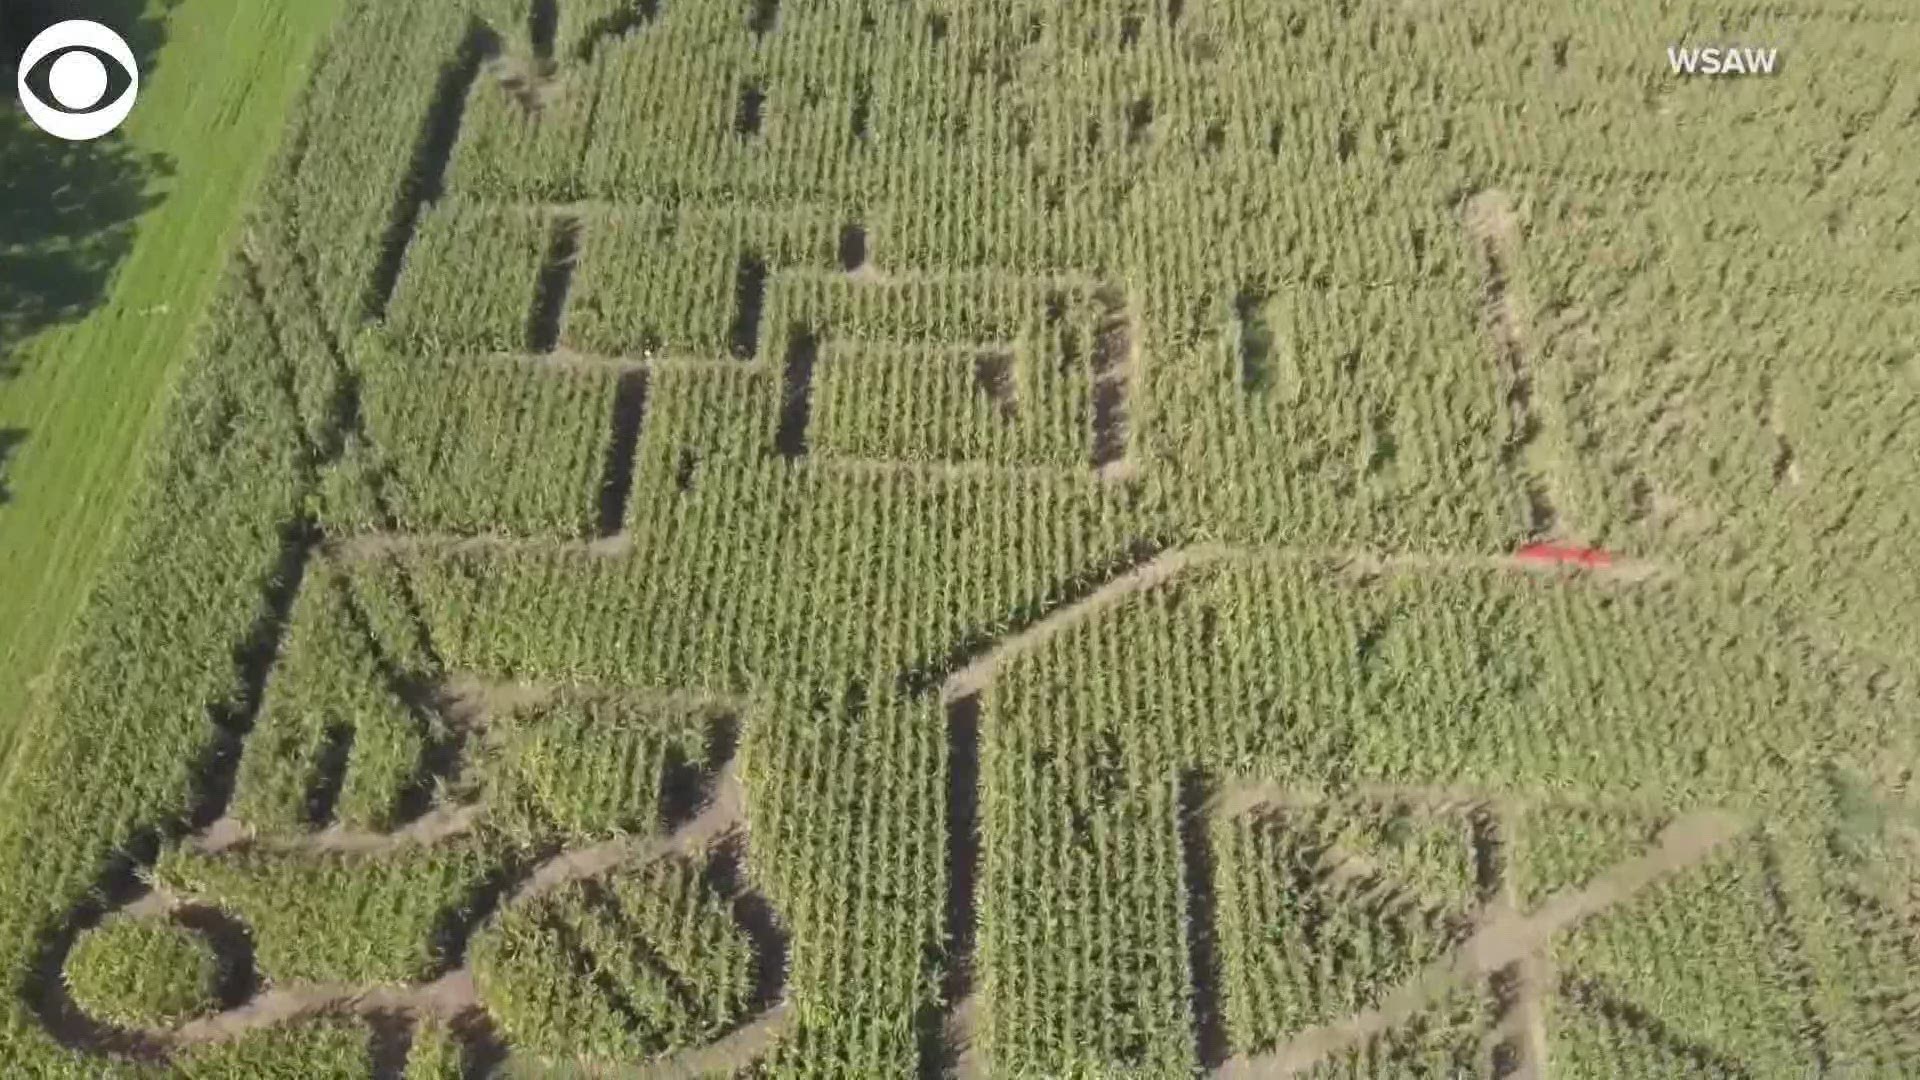 This corn maze was created with a special purpose in mind!